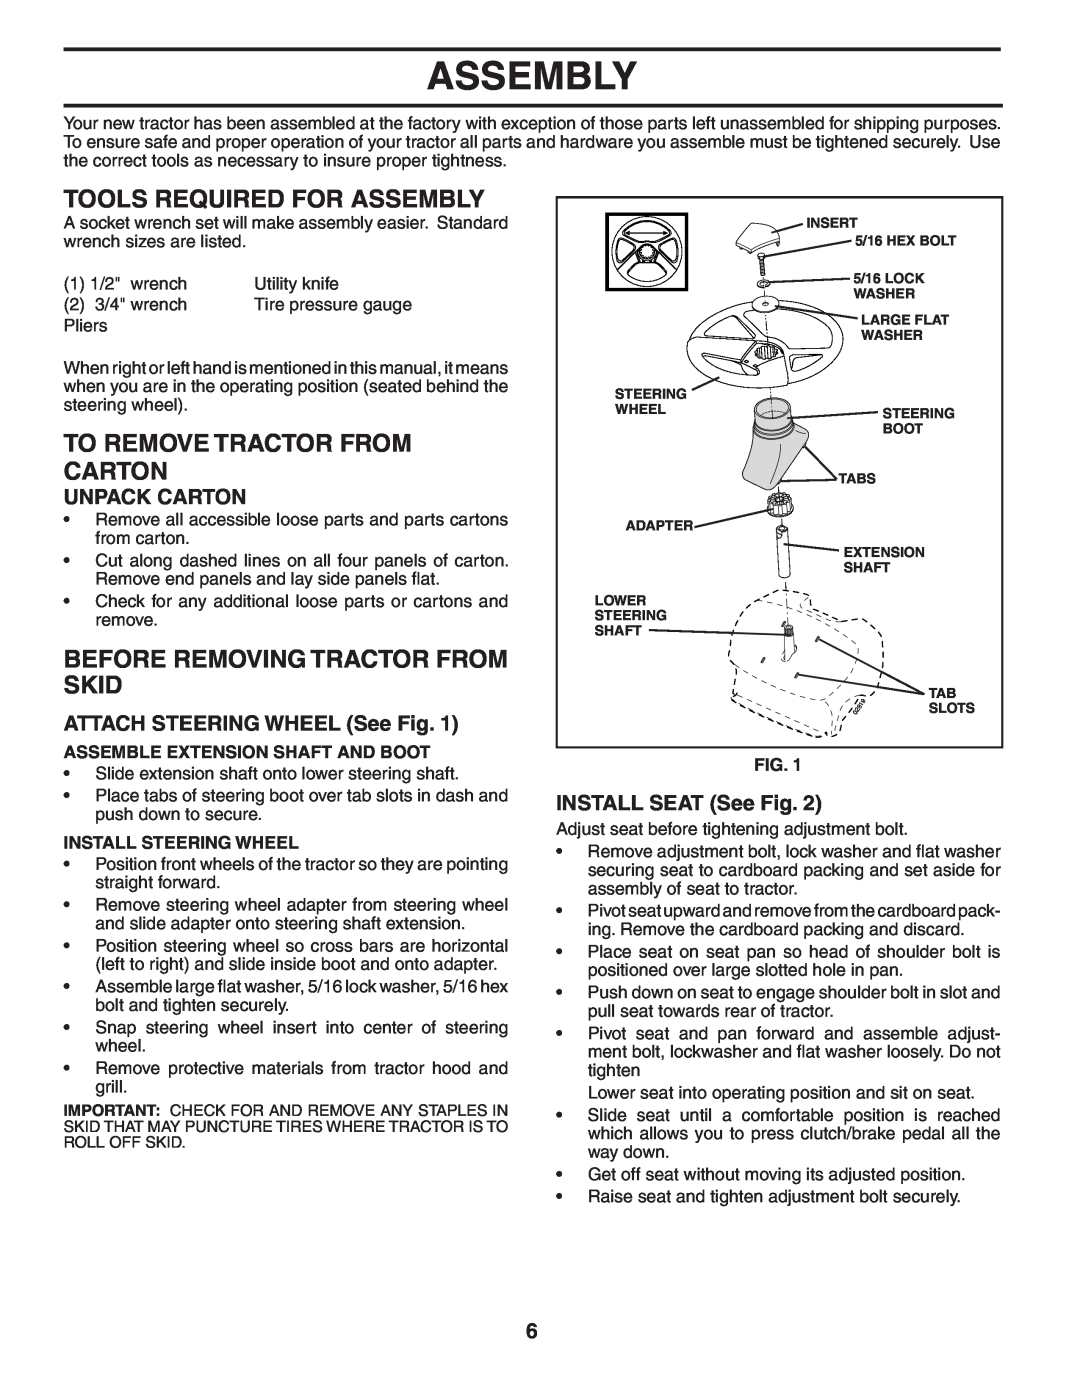 Poulan HD17542 manual Tools Required For Assembly, To Remove Tractor From Carton, Before Removing Tractor From Skid 